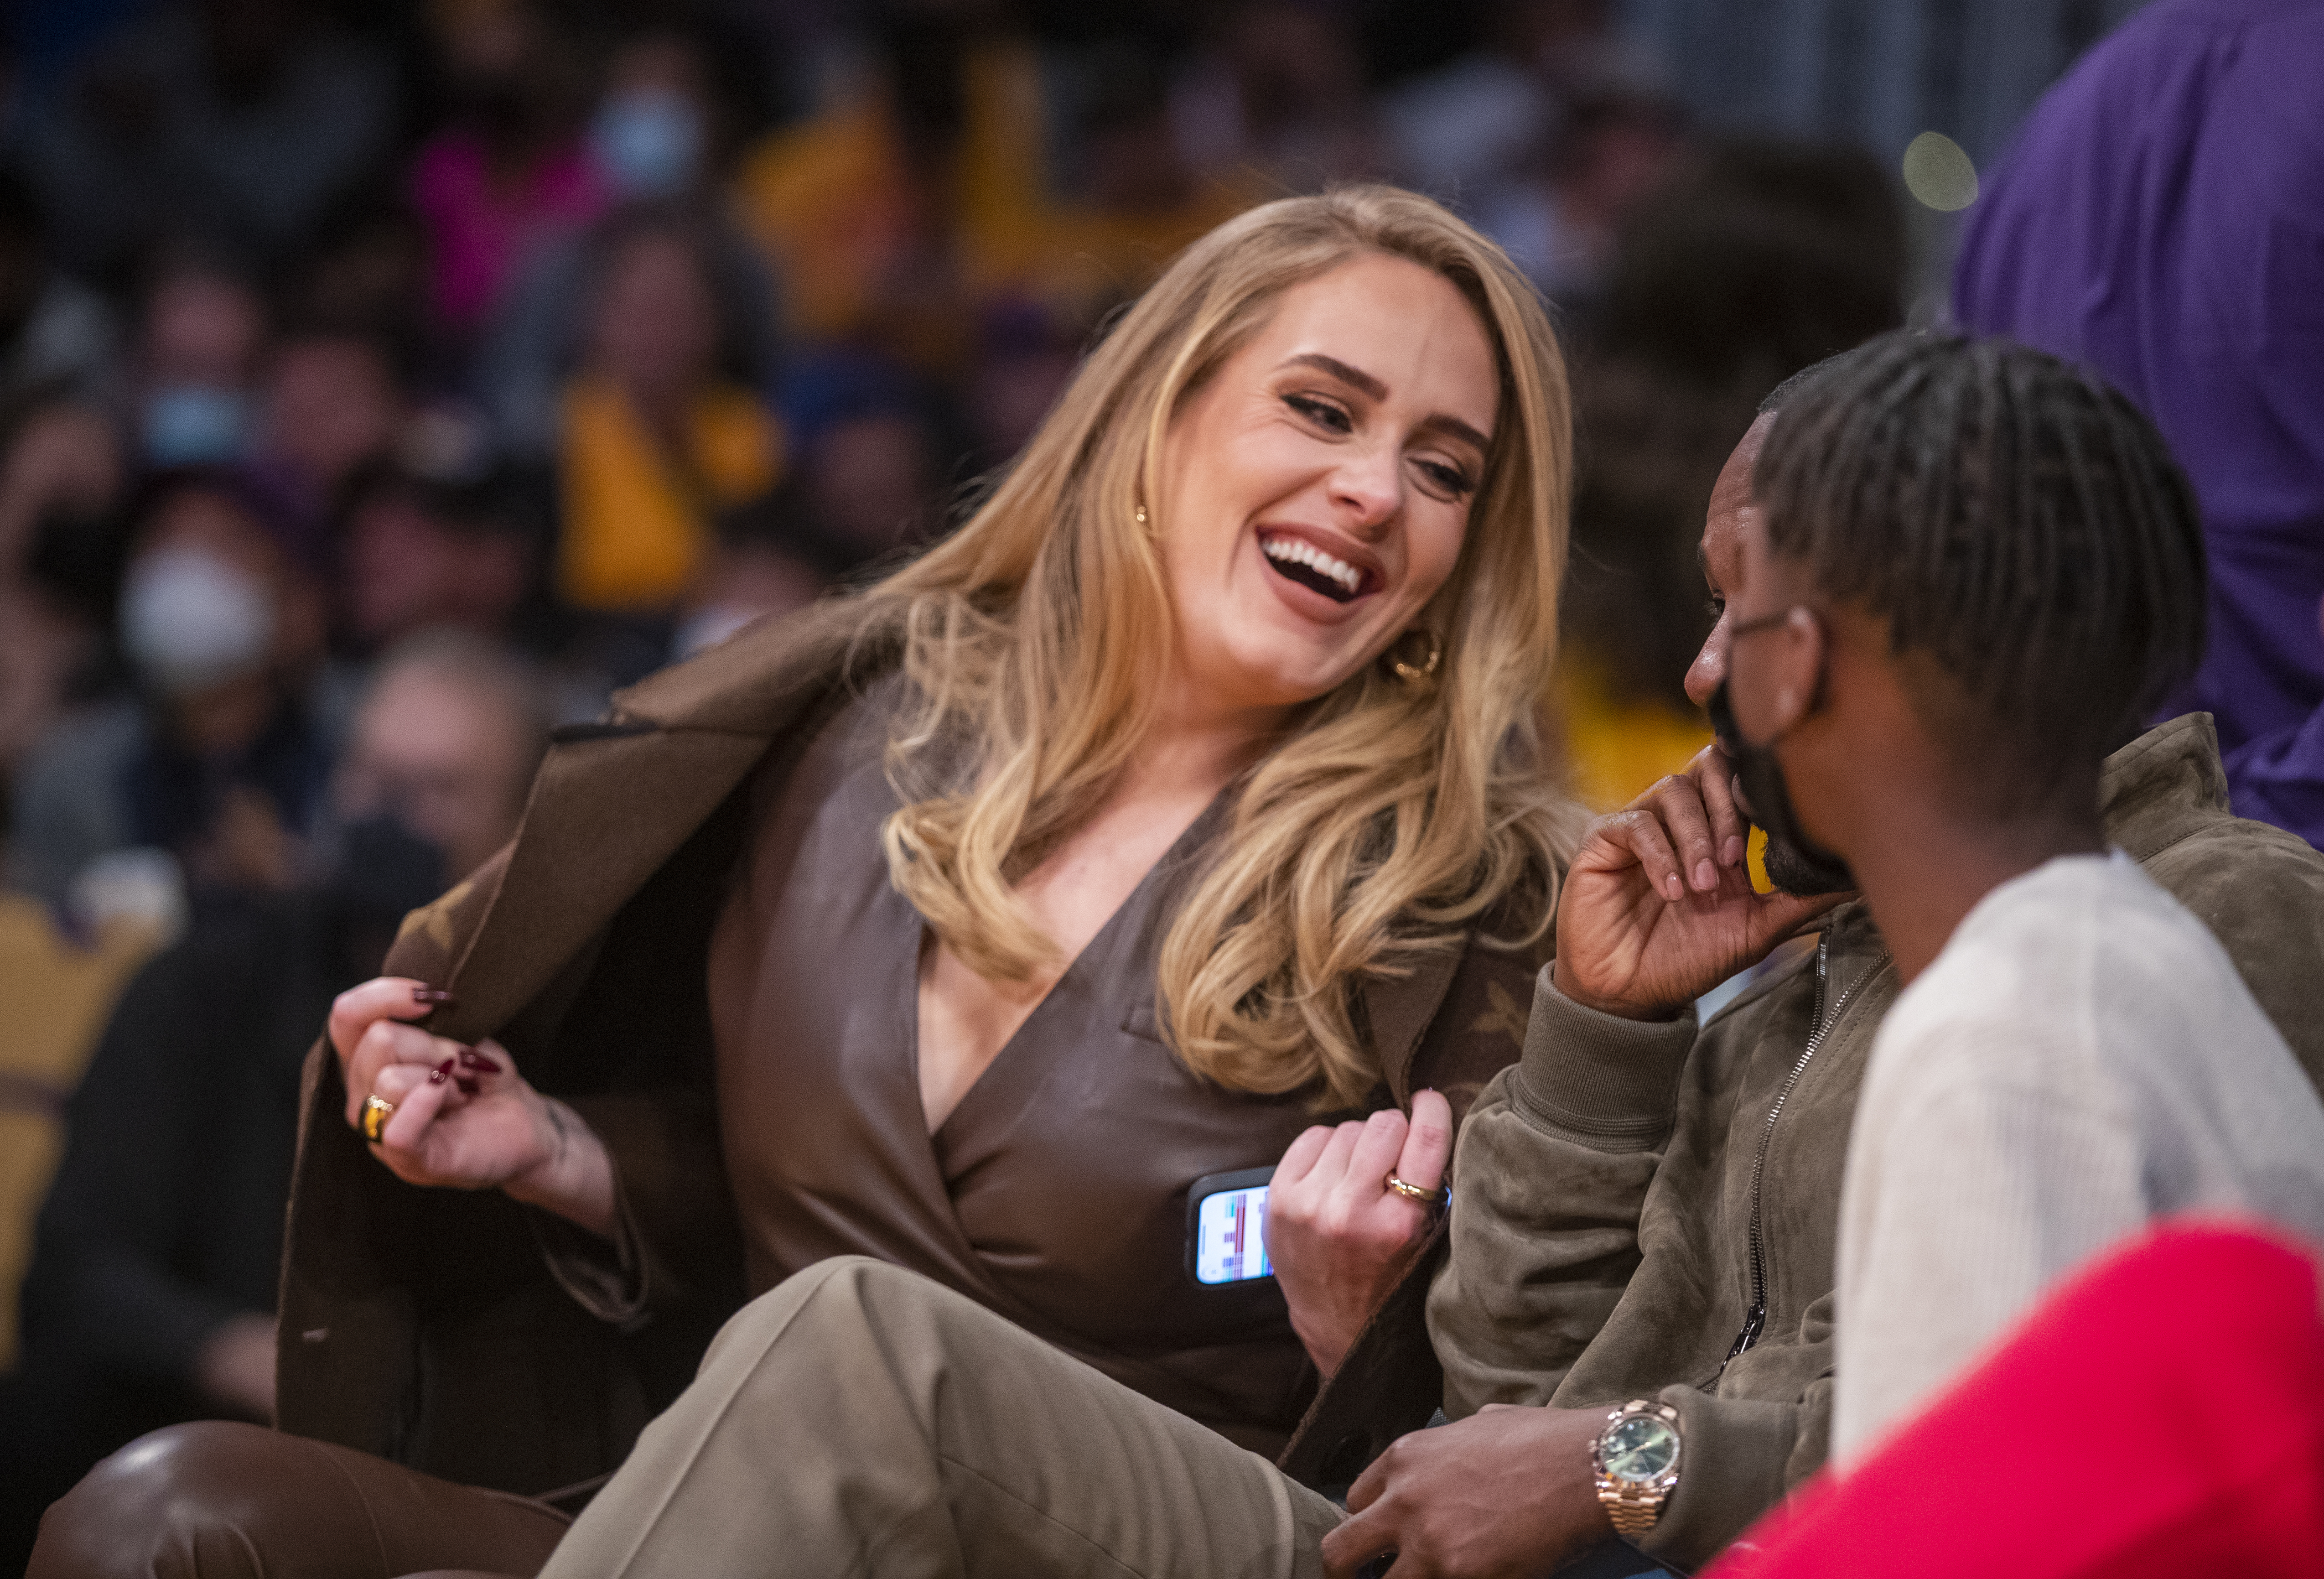 Adele and Rich Paul attend a game between the Golden State Warriors and the Los Angeles Lakers in Los Angeles on October 19, 2021 | Source: Getty Images